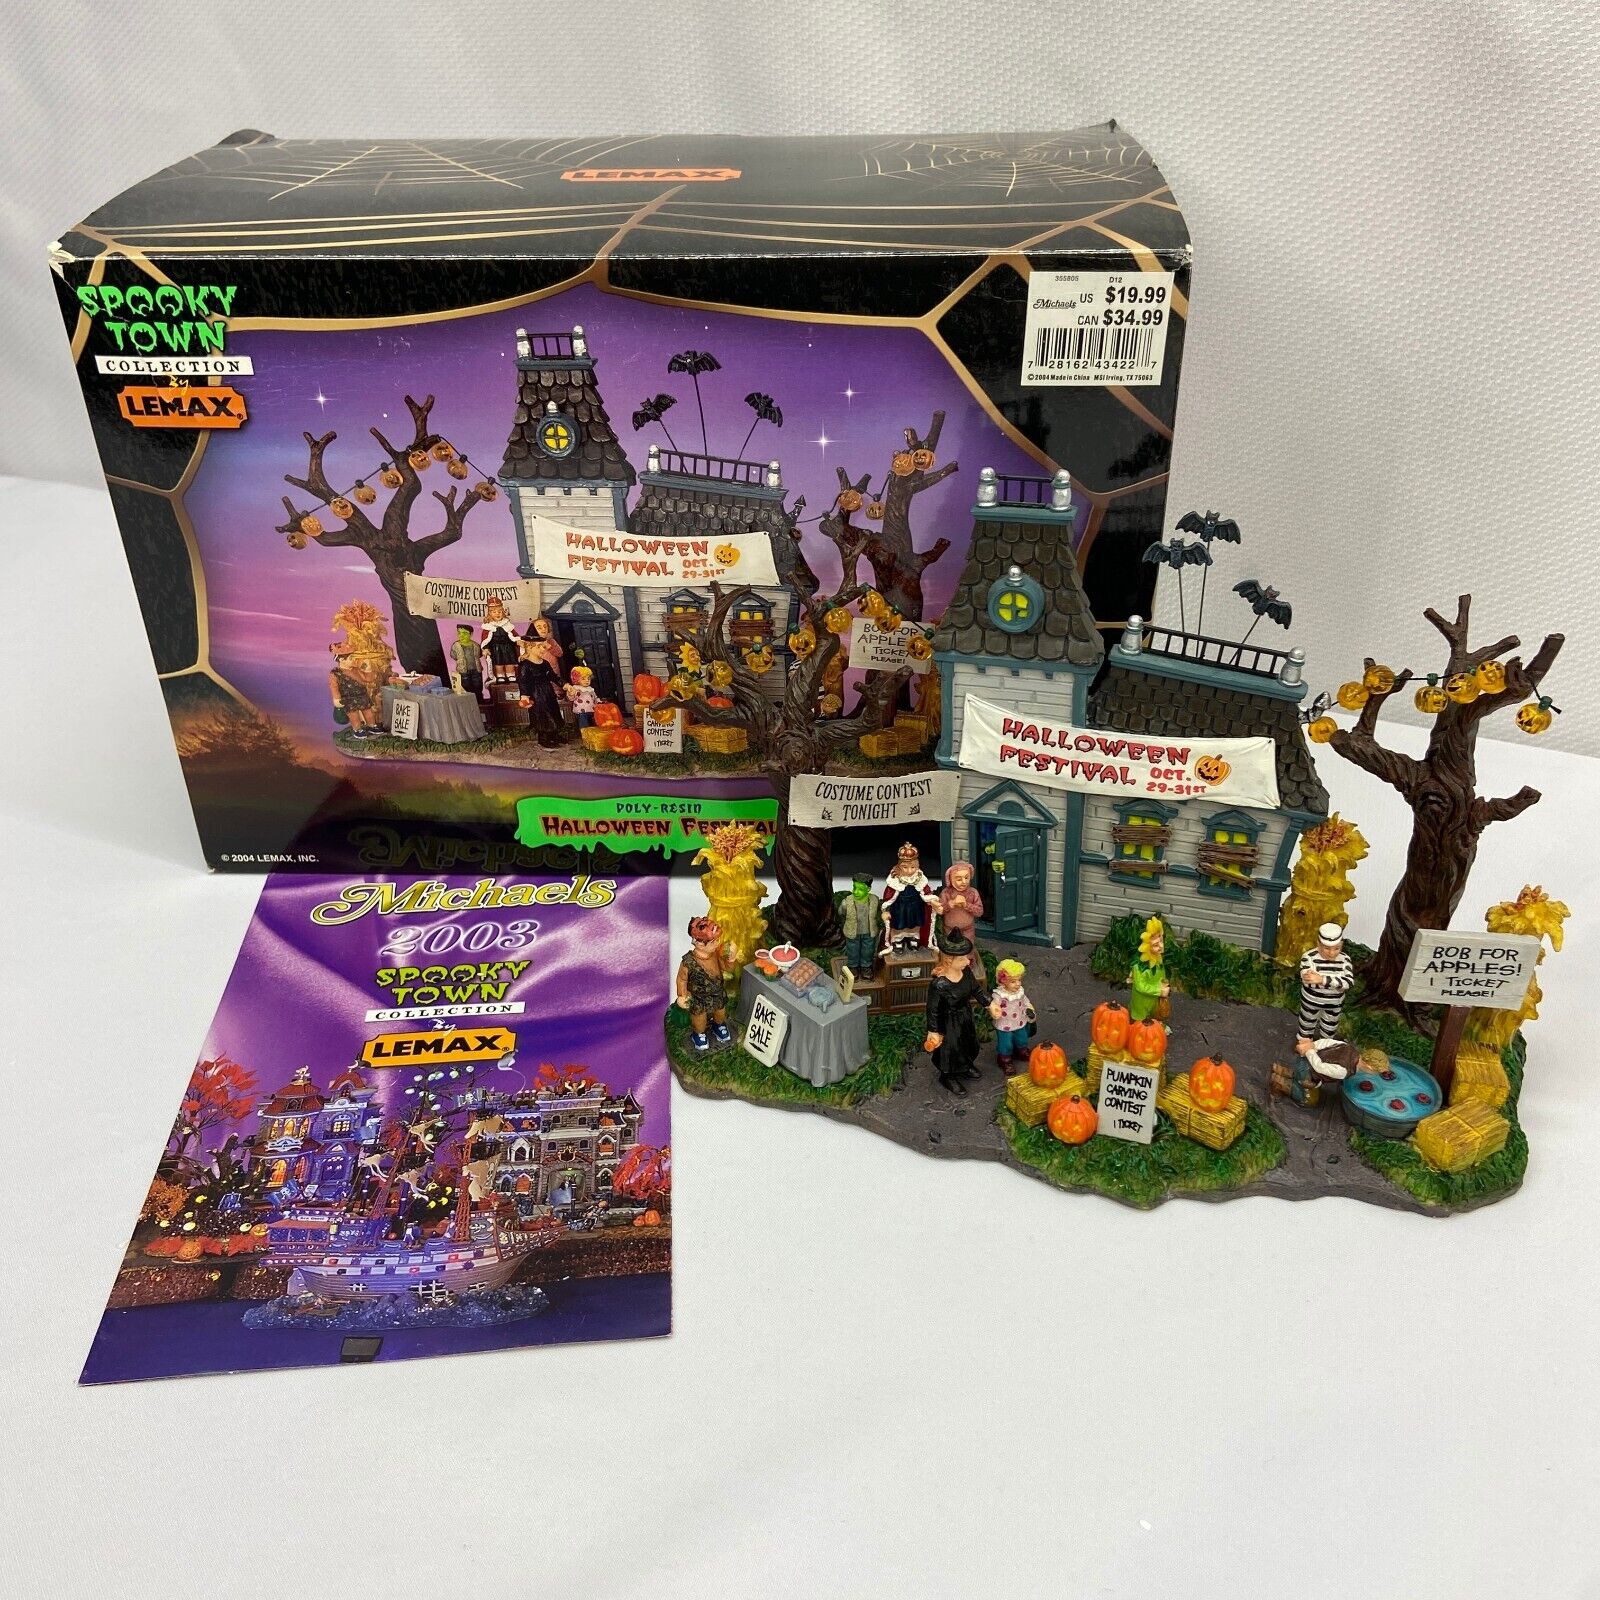 Lemax Spooky Town Collection Halloween Festival 2004 Holiday Decor 43422 RETIRED